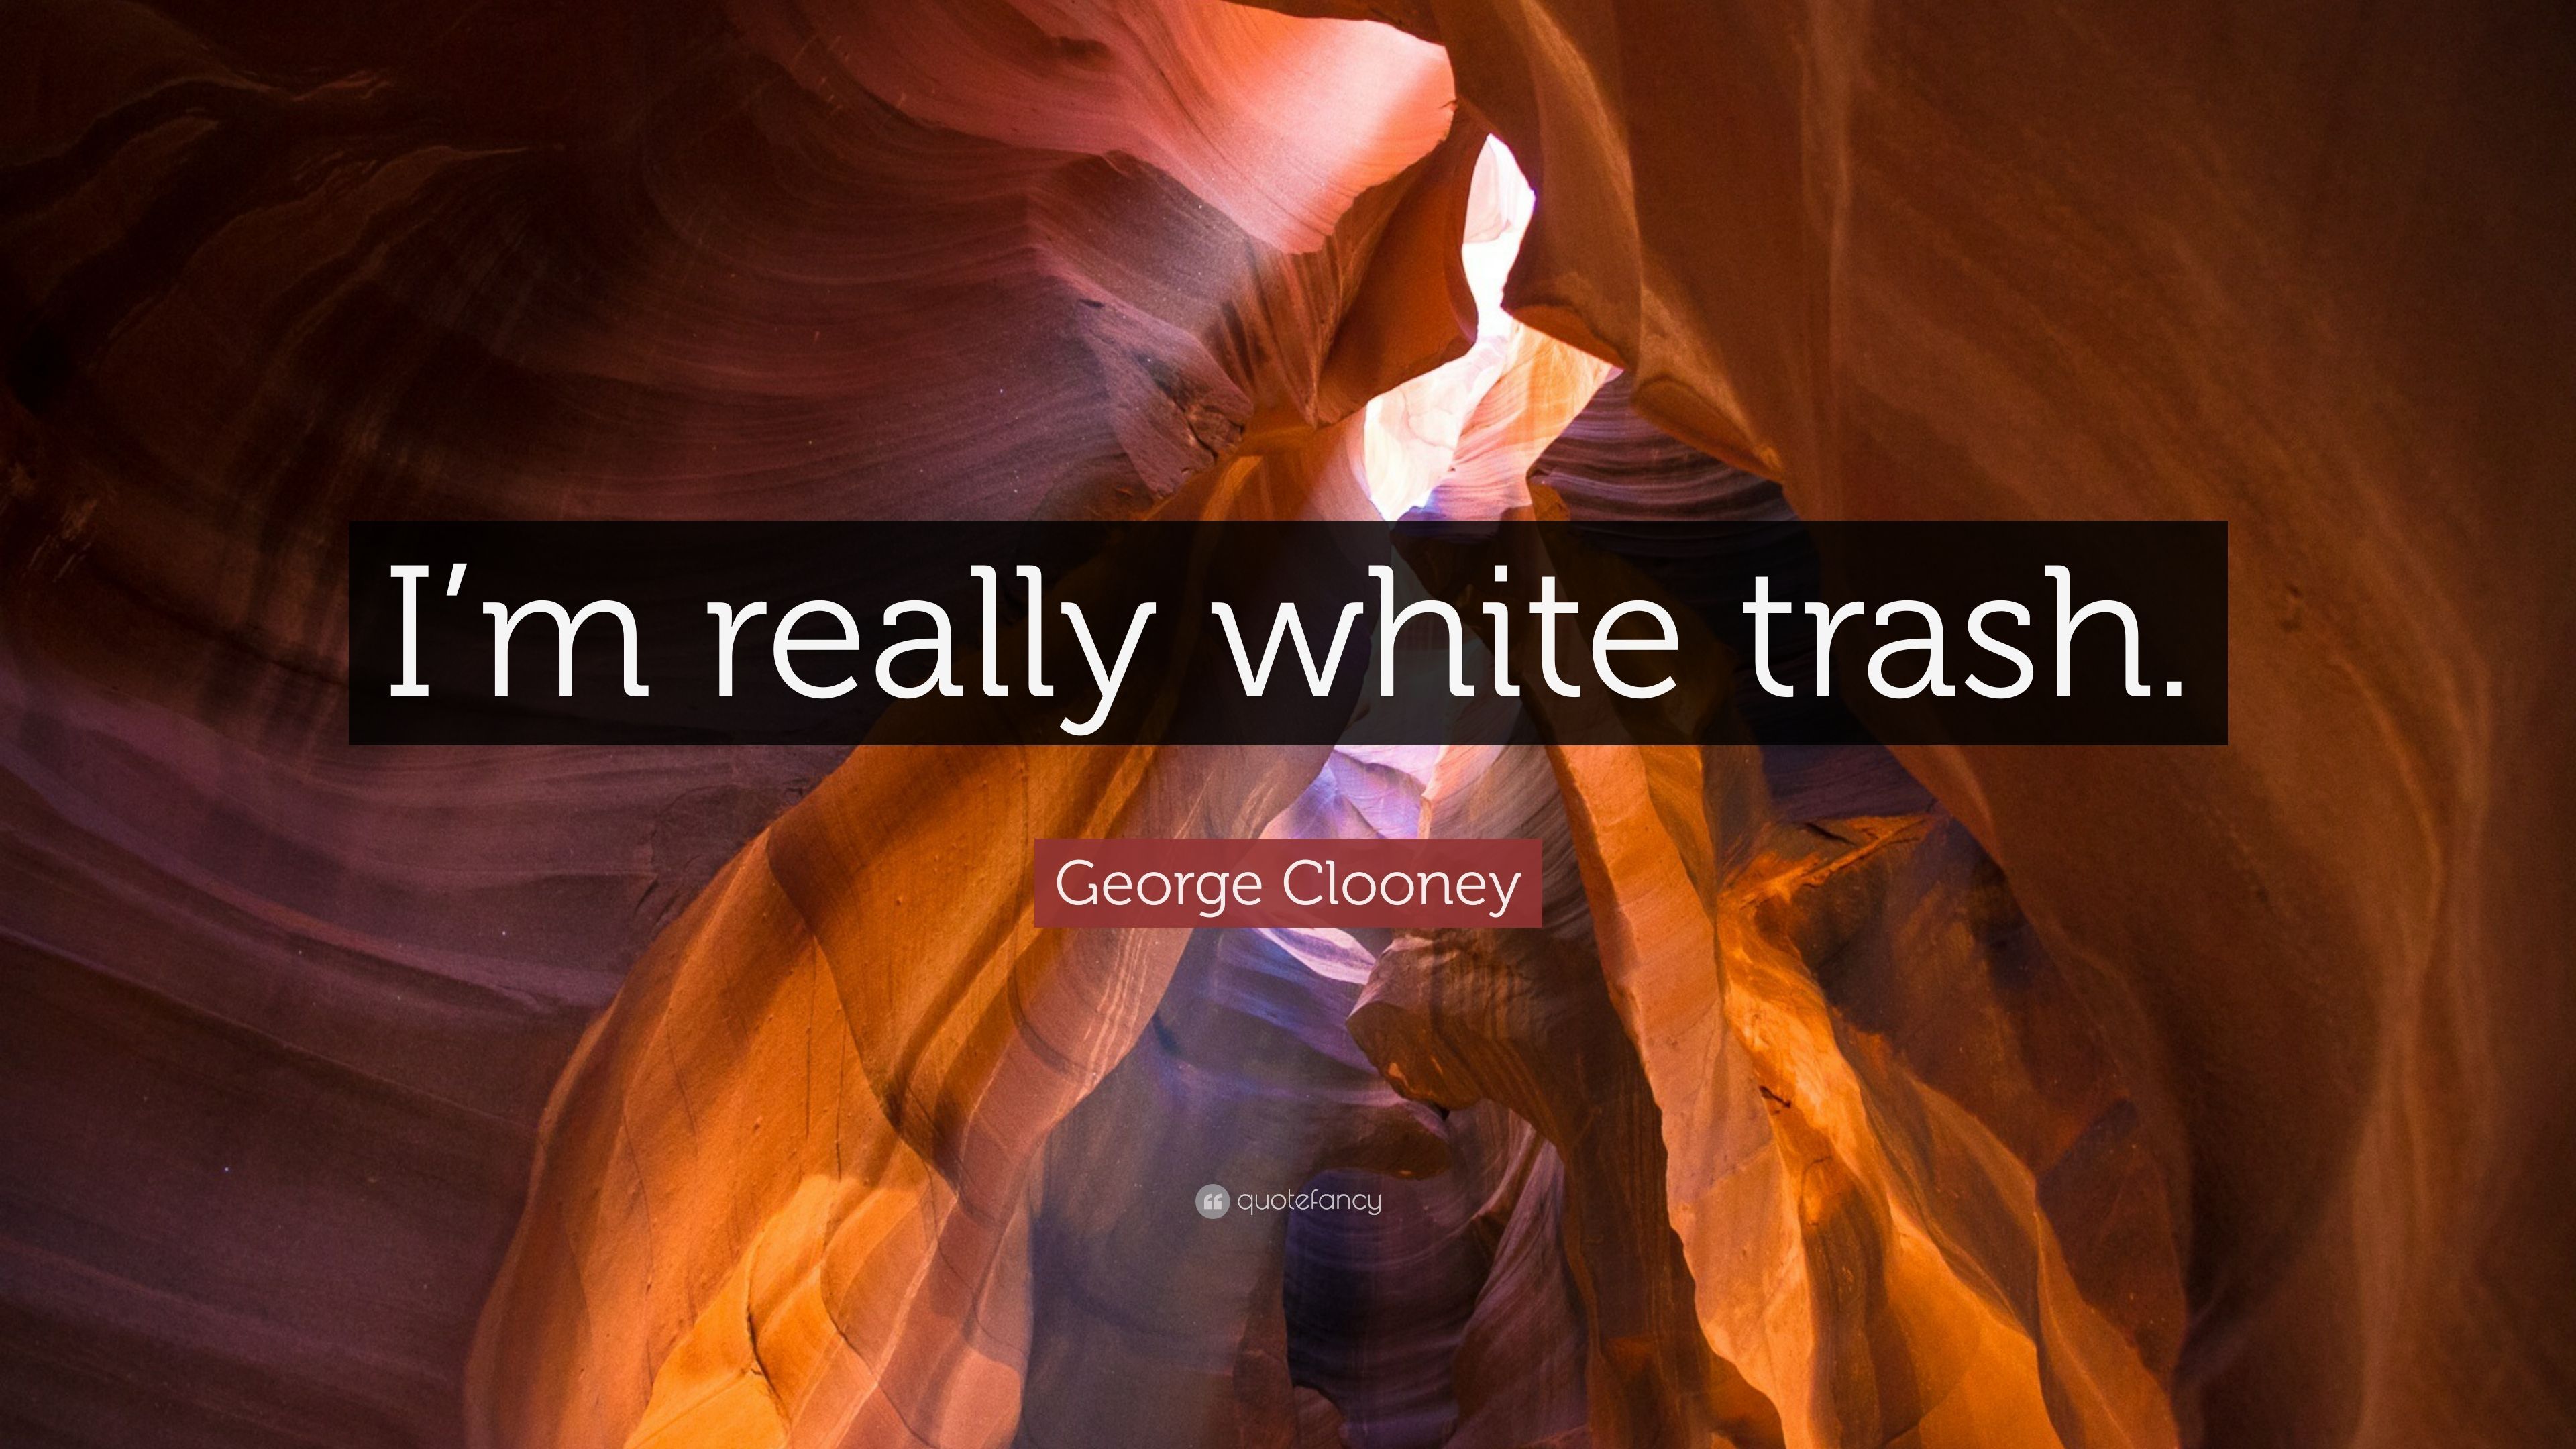 George Clooney Quote: “I'm really white trash.” (7 wallpaper)